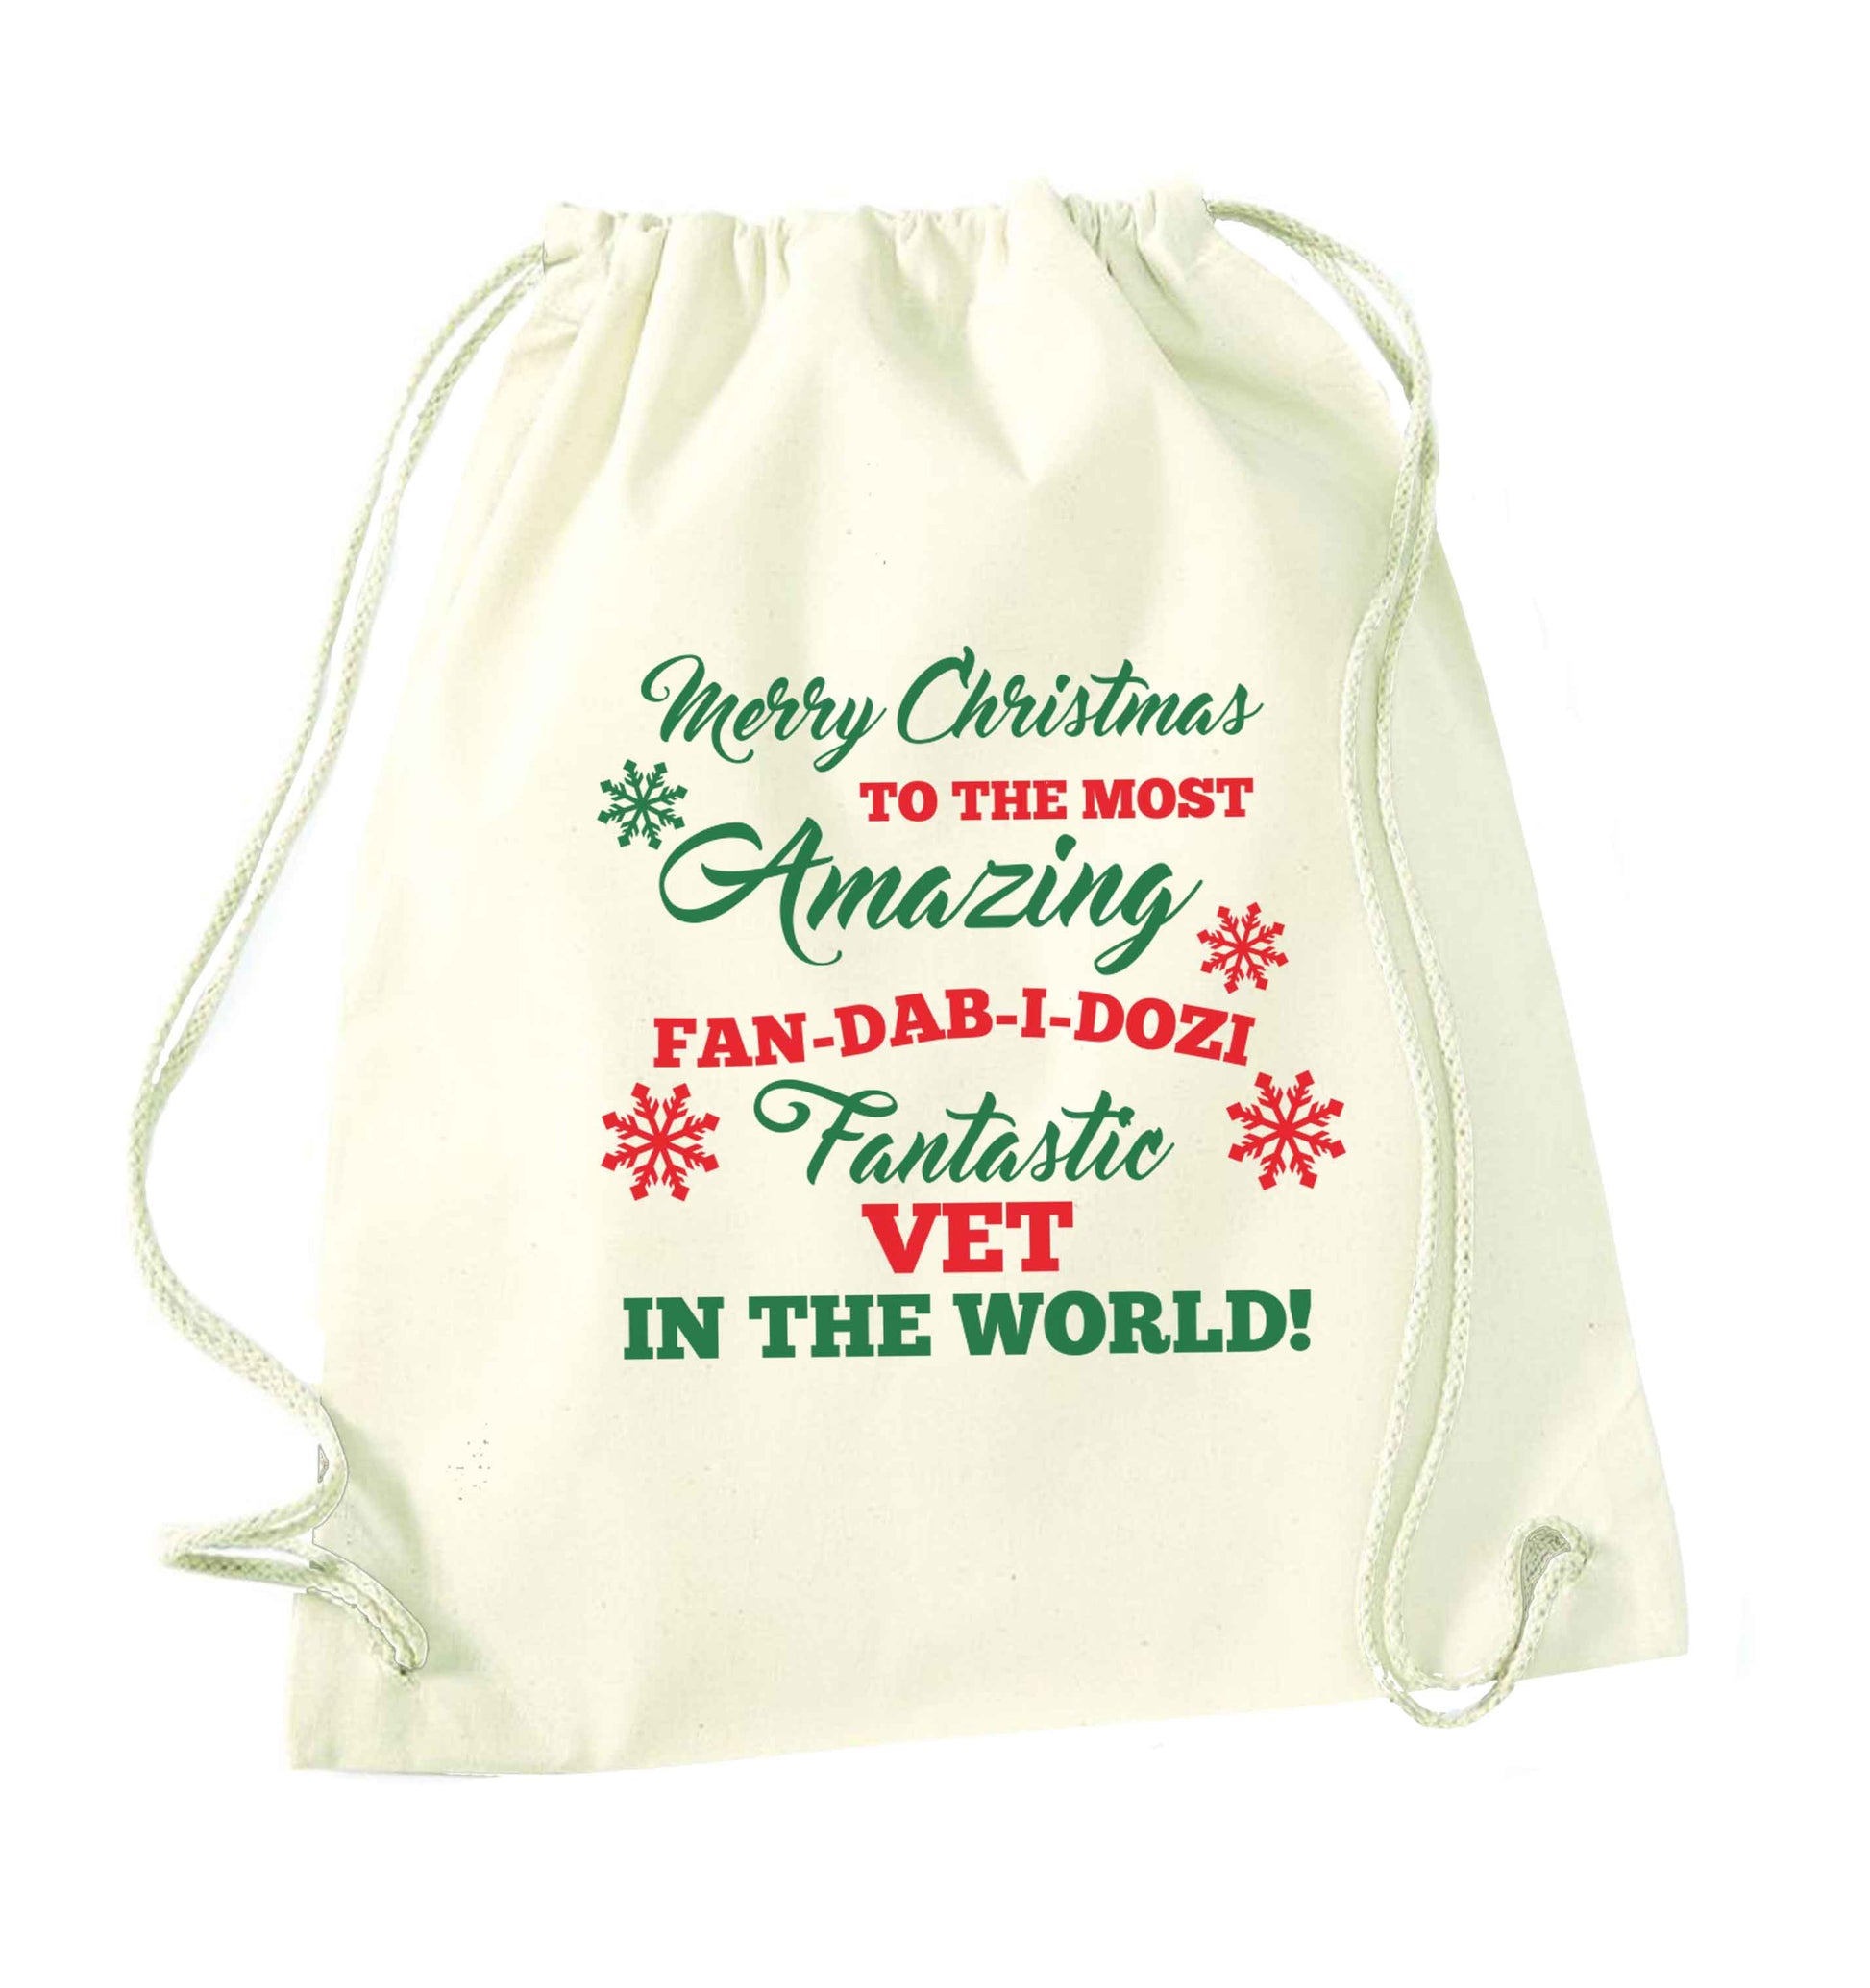 Merry Christmas to the most amazing vet in the world! natural drawstring bag